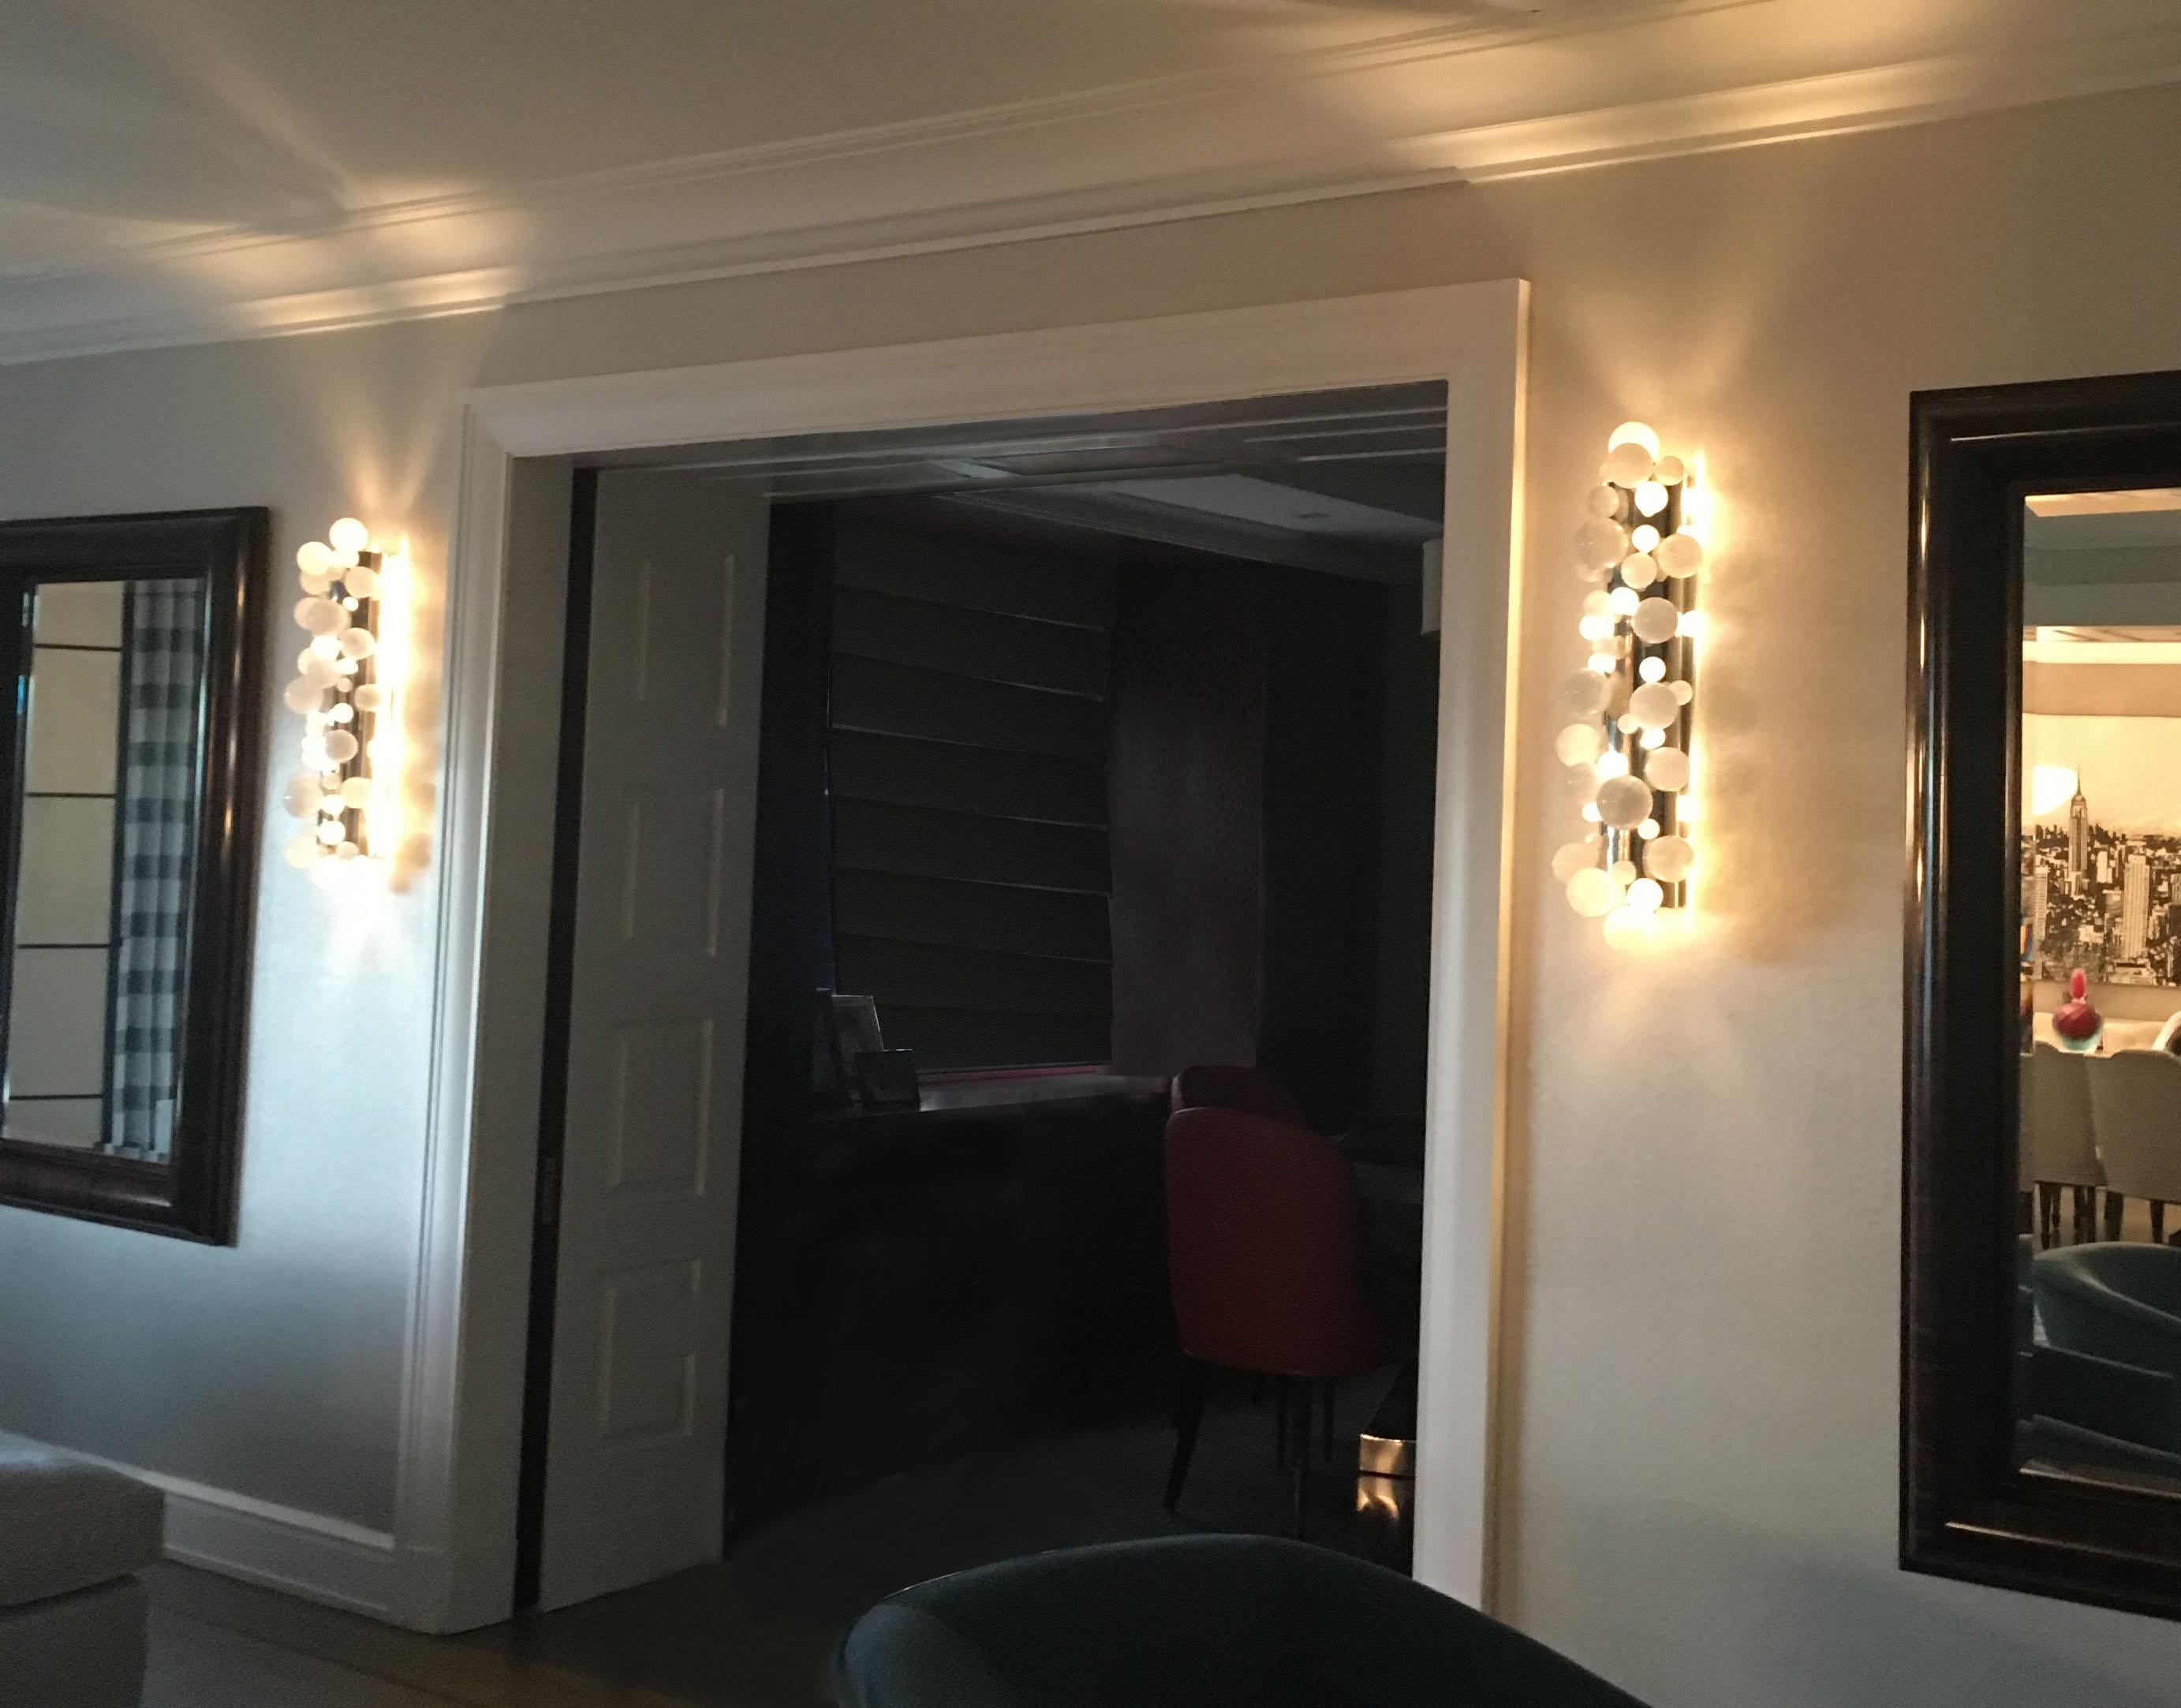 Pair of bubble rock crystal sconces with the polish nickel mounted. Created by Phoenix gallery NYC.
Each sconce installed four sockets. Use four 60w LED warm light bulbs. Total 240w max. Light bulbs included. 
Custom size upon request.
Recommend